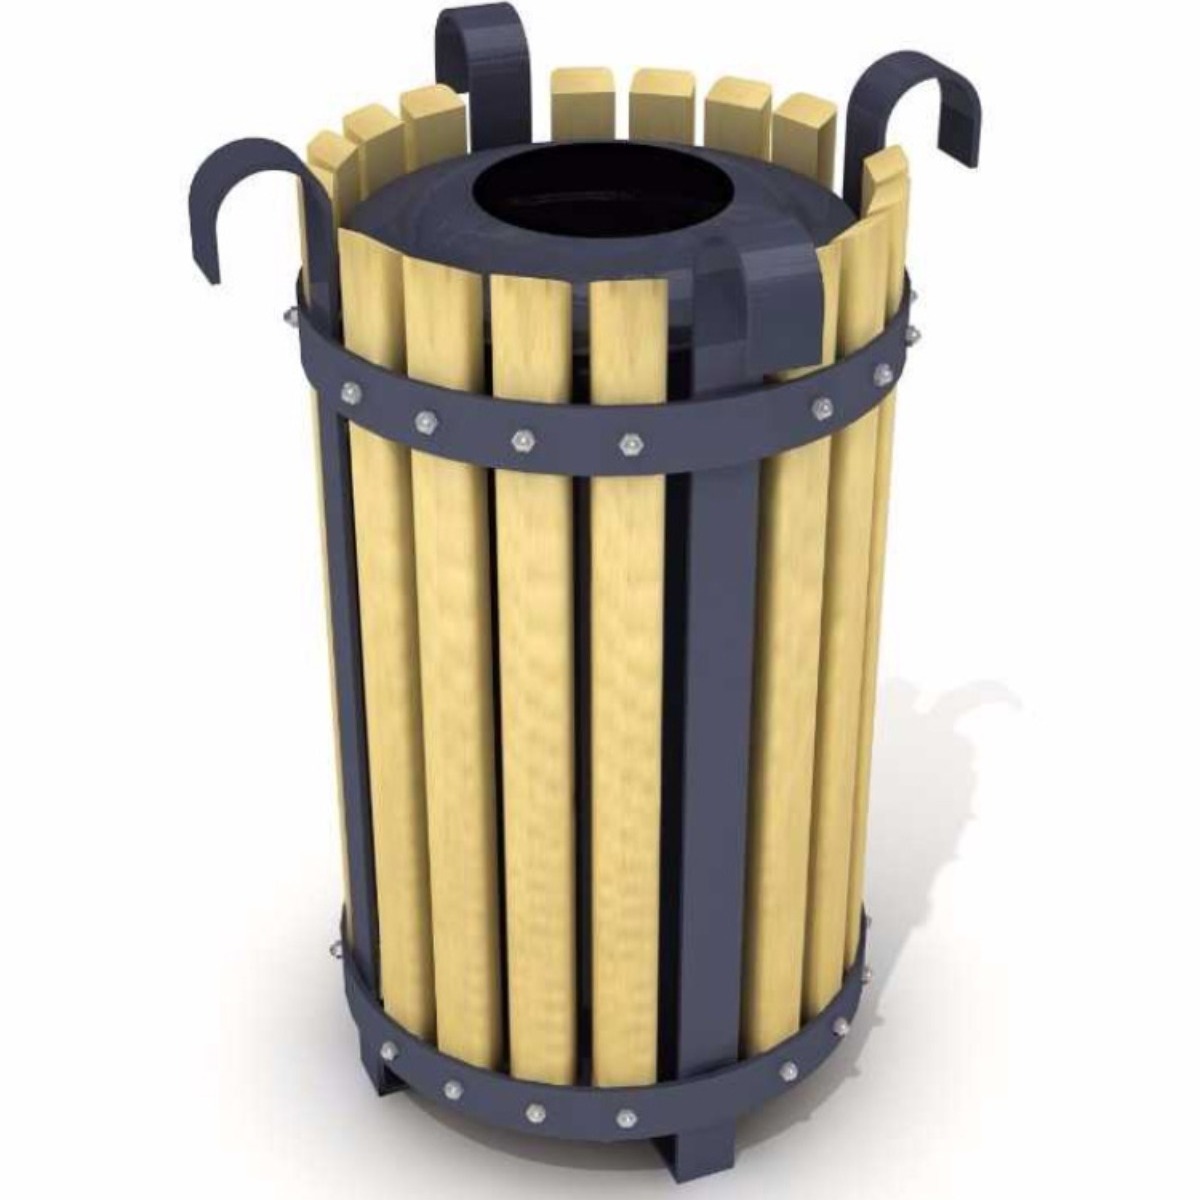 AB-503 Wood Open Space Trash Can